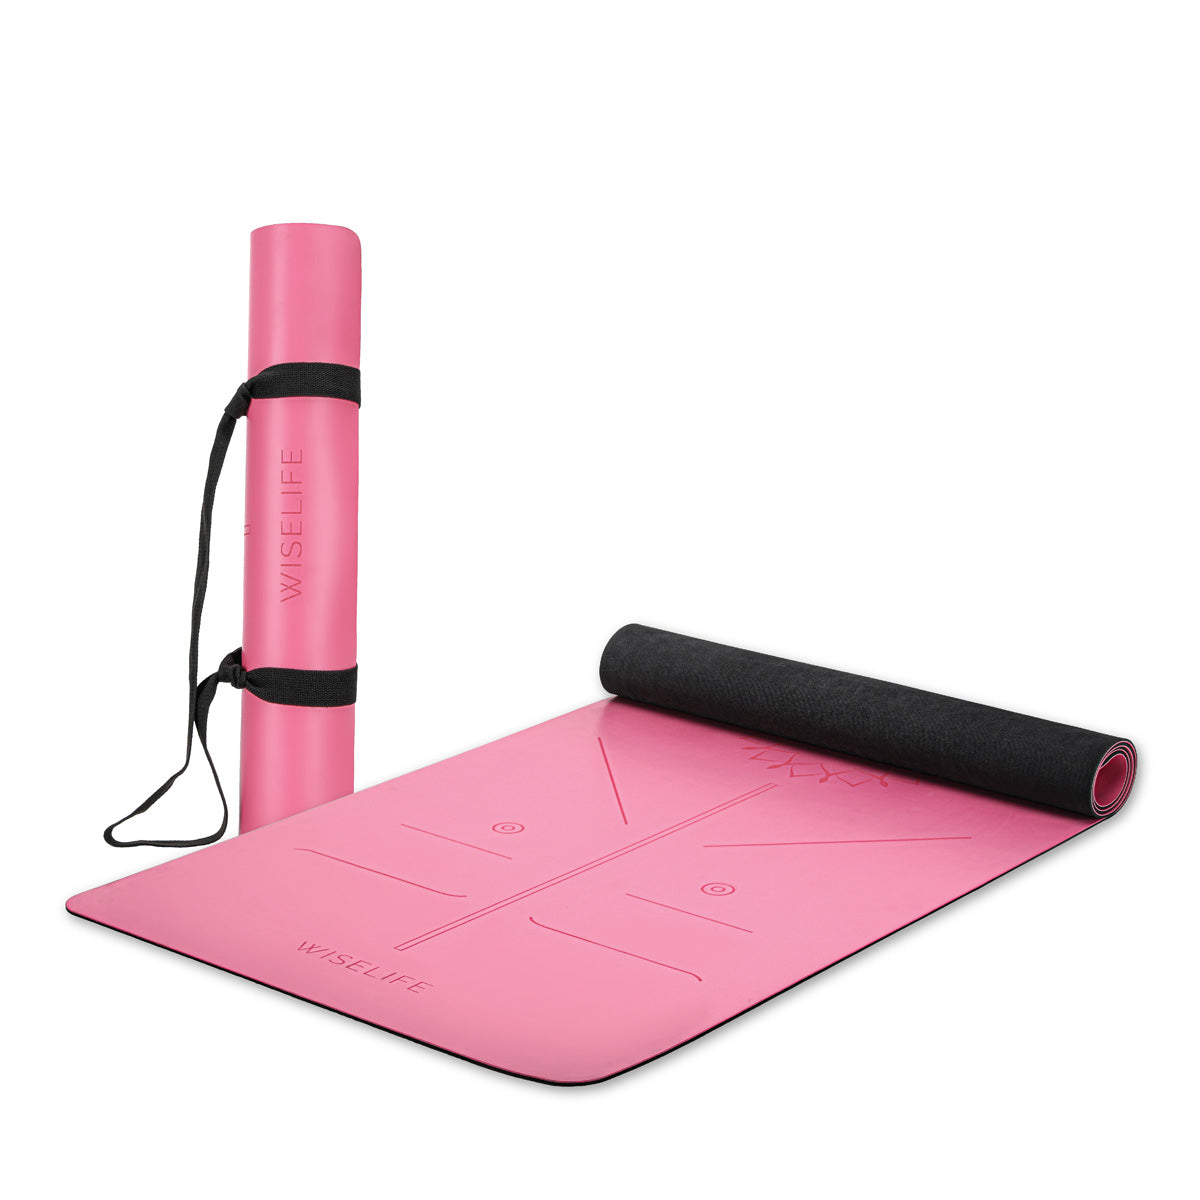 Pink an Black Rubber Wiselife Pu Leather Eco Yoga Mat 6mm For